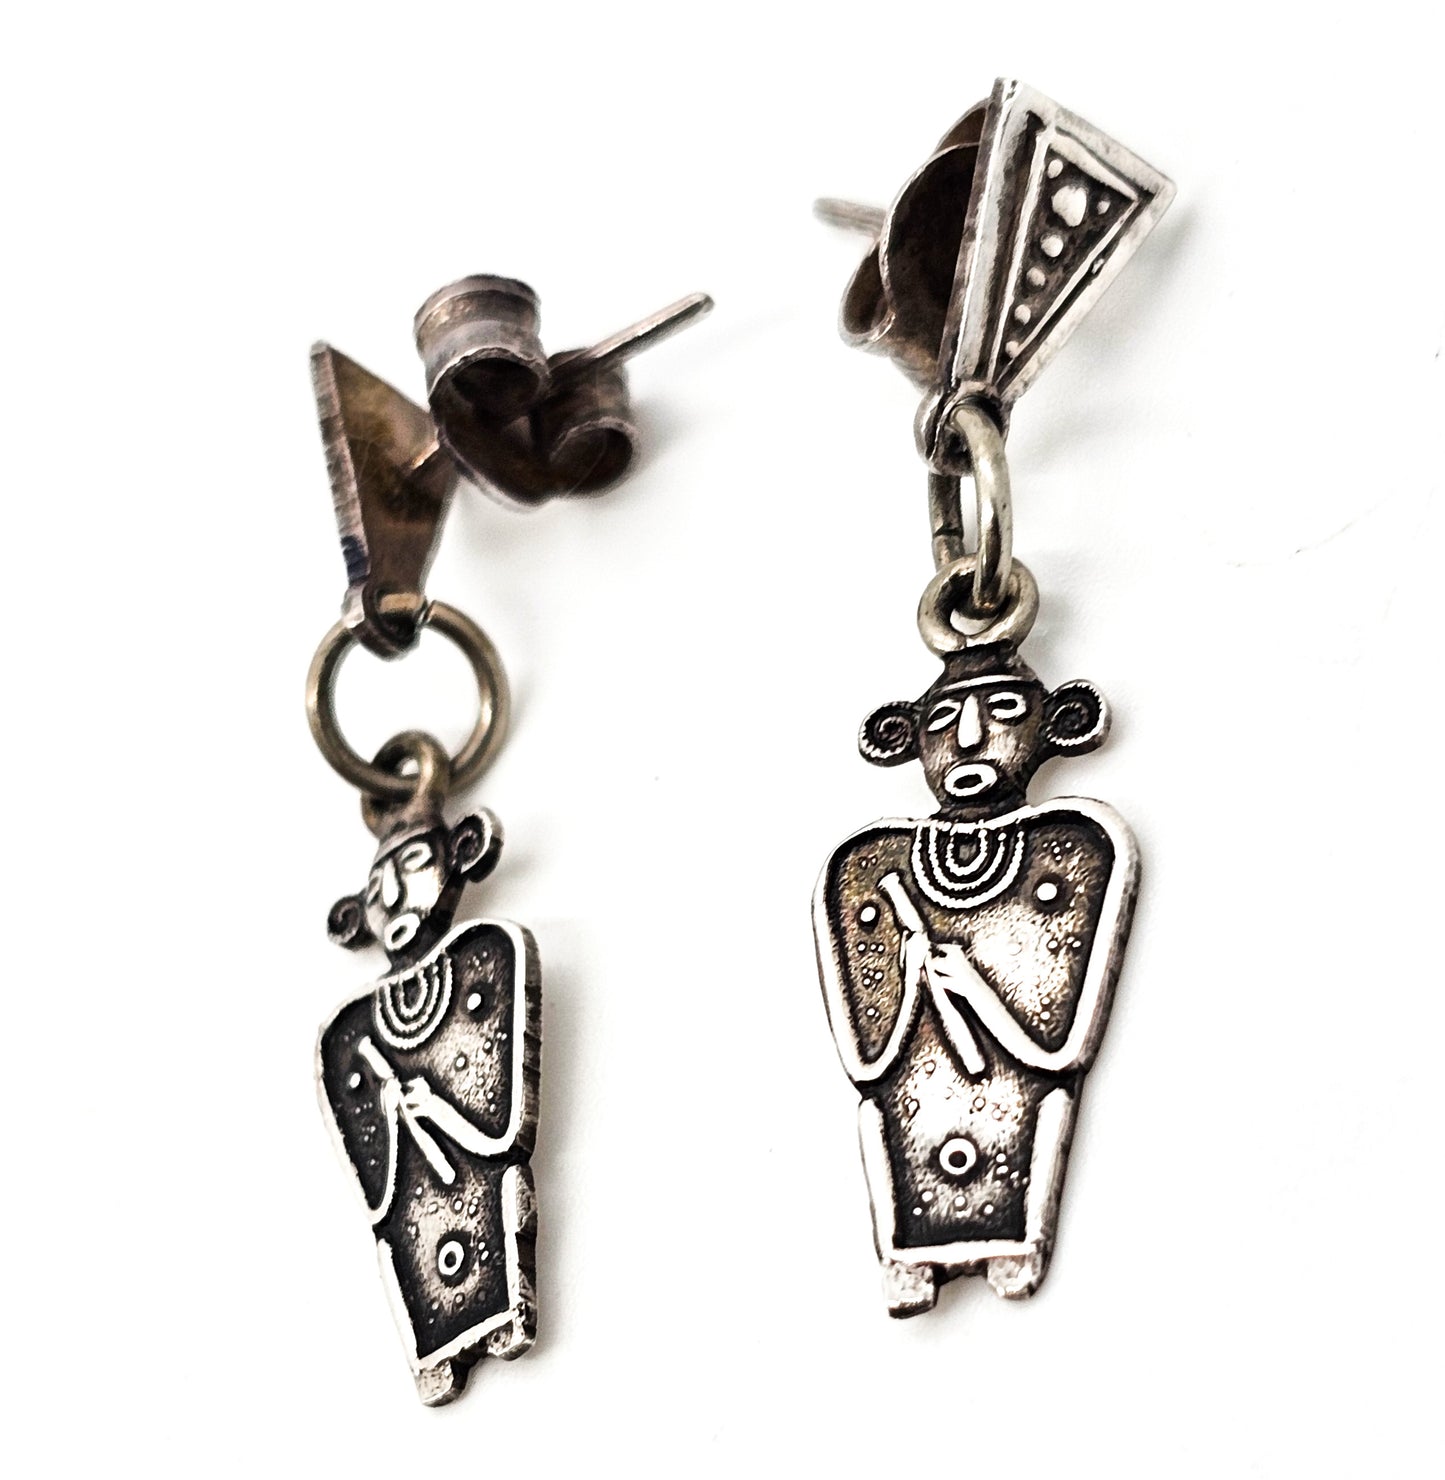 Aztec flute playing silhouette vintage 900 sterling silver post earrings